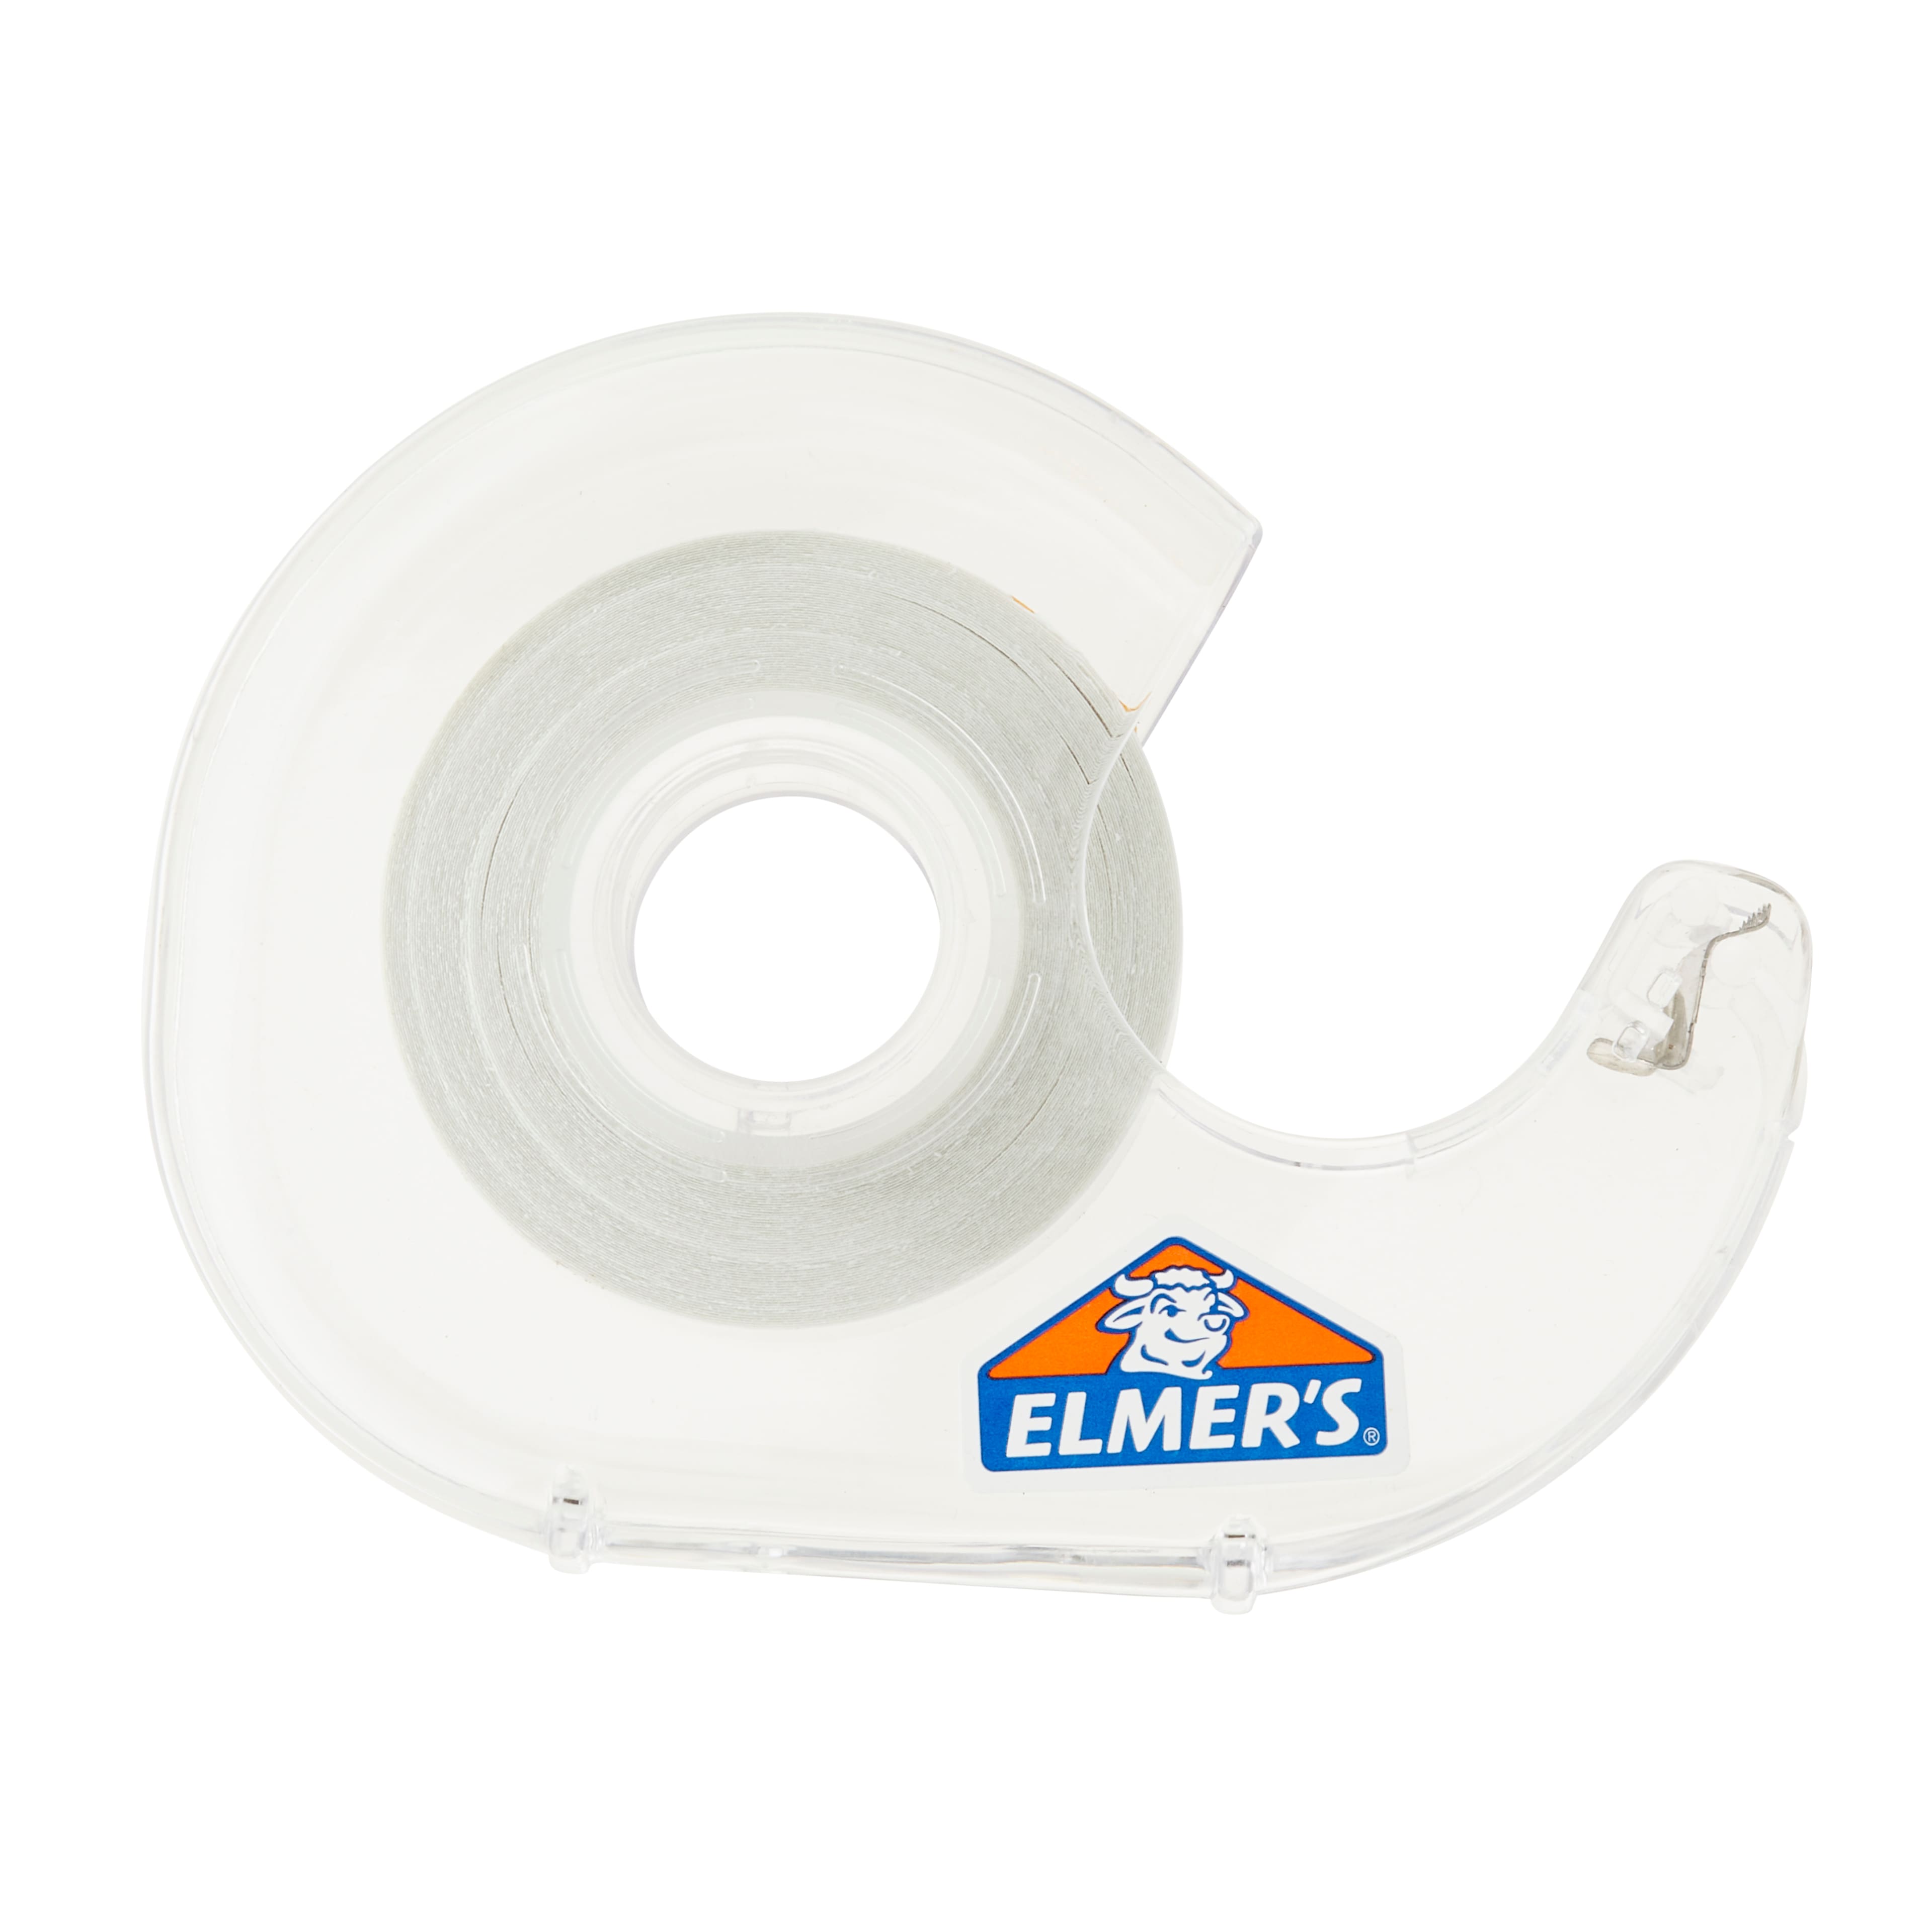 6 Pack: Elmer&#x27;s&#xAE; Permanent Double Sided Tape